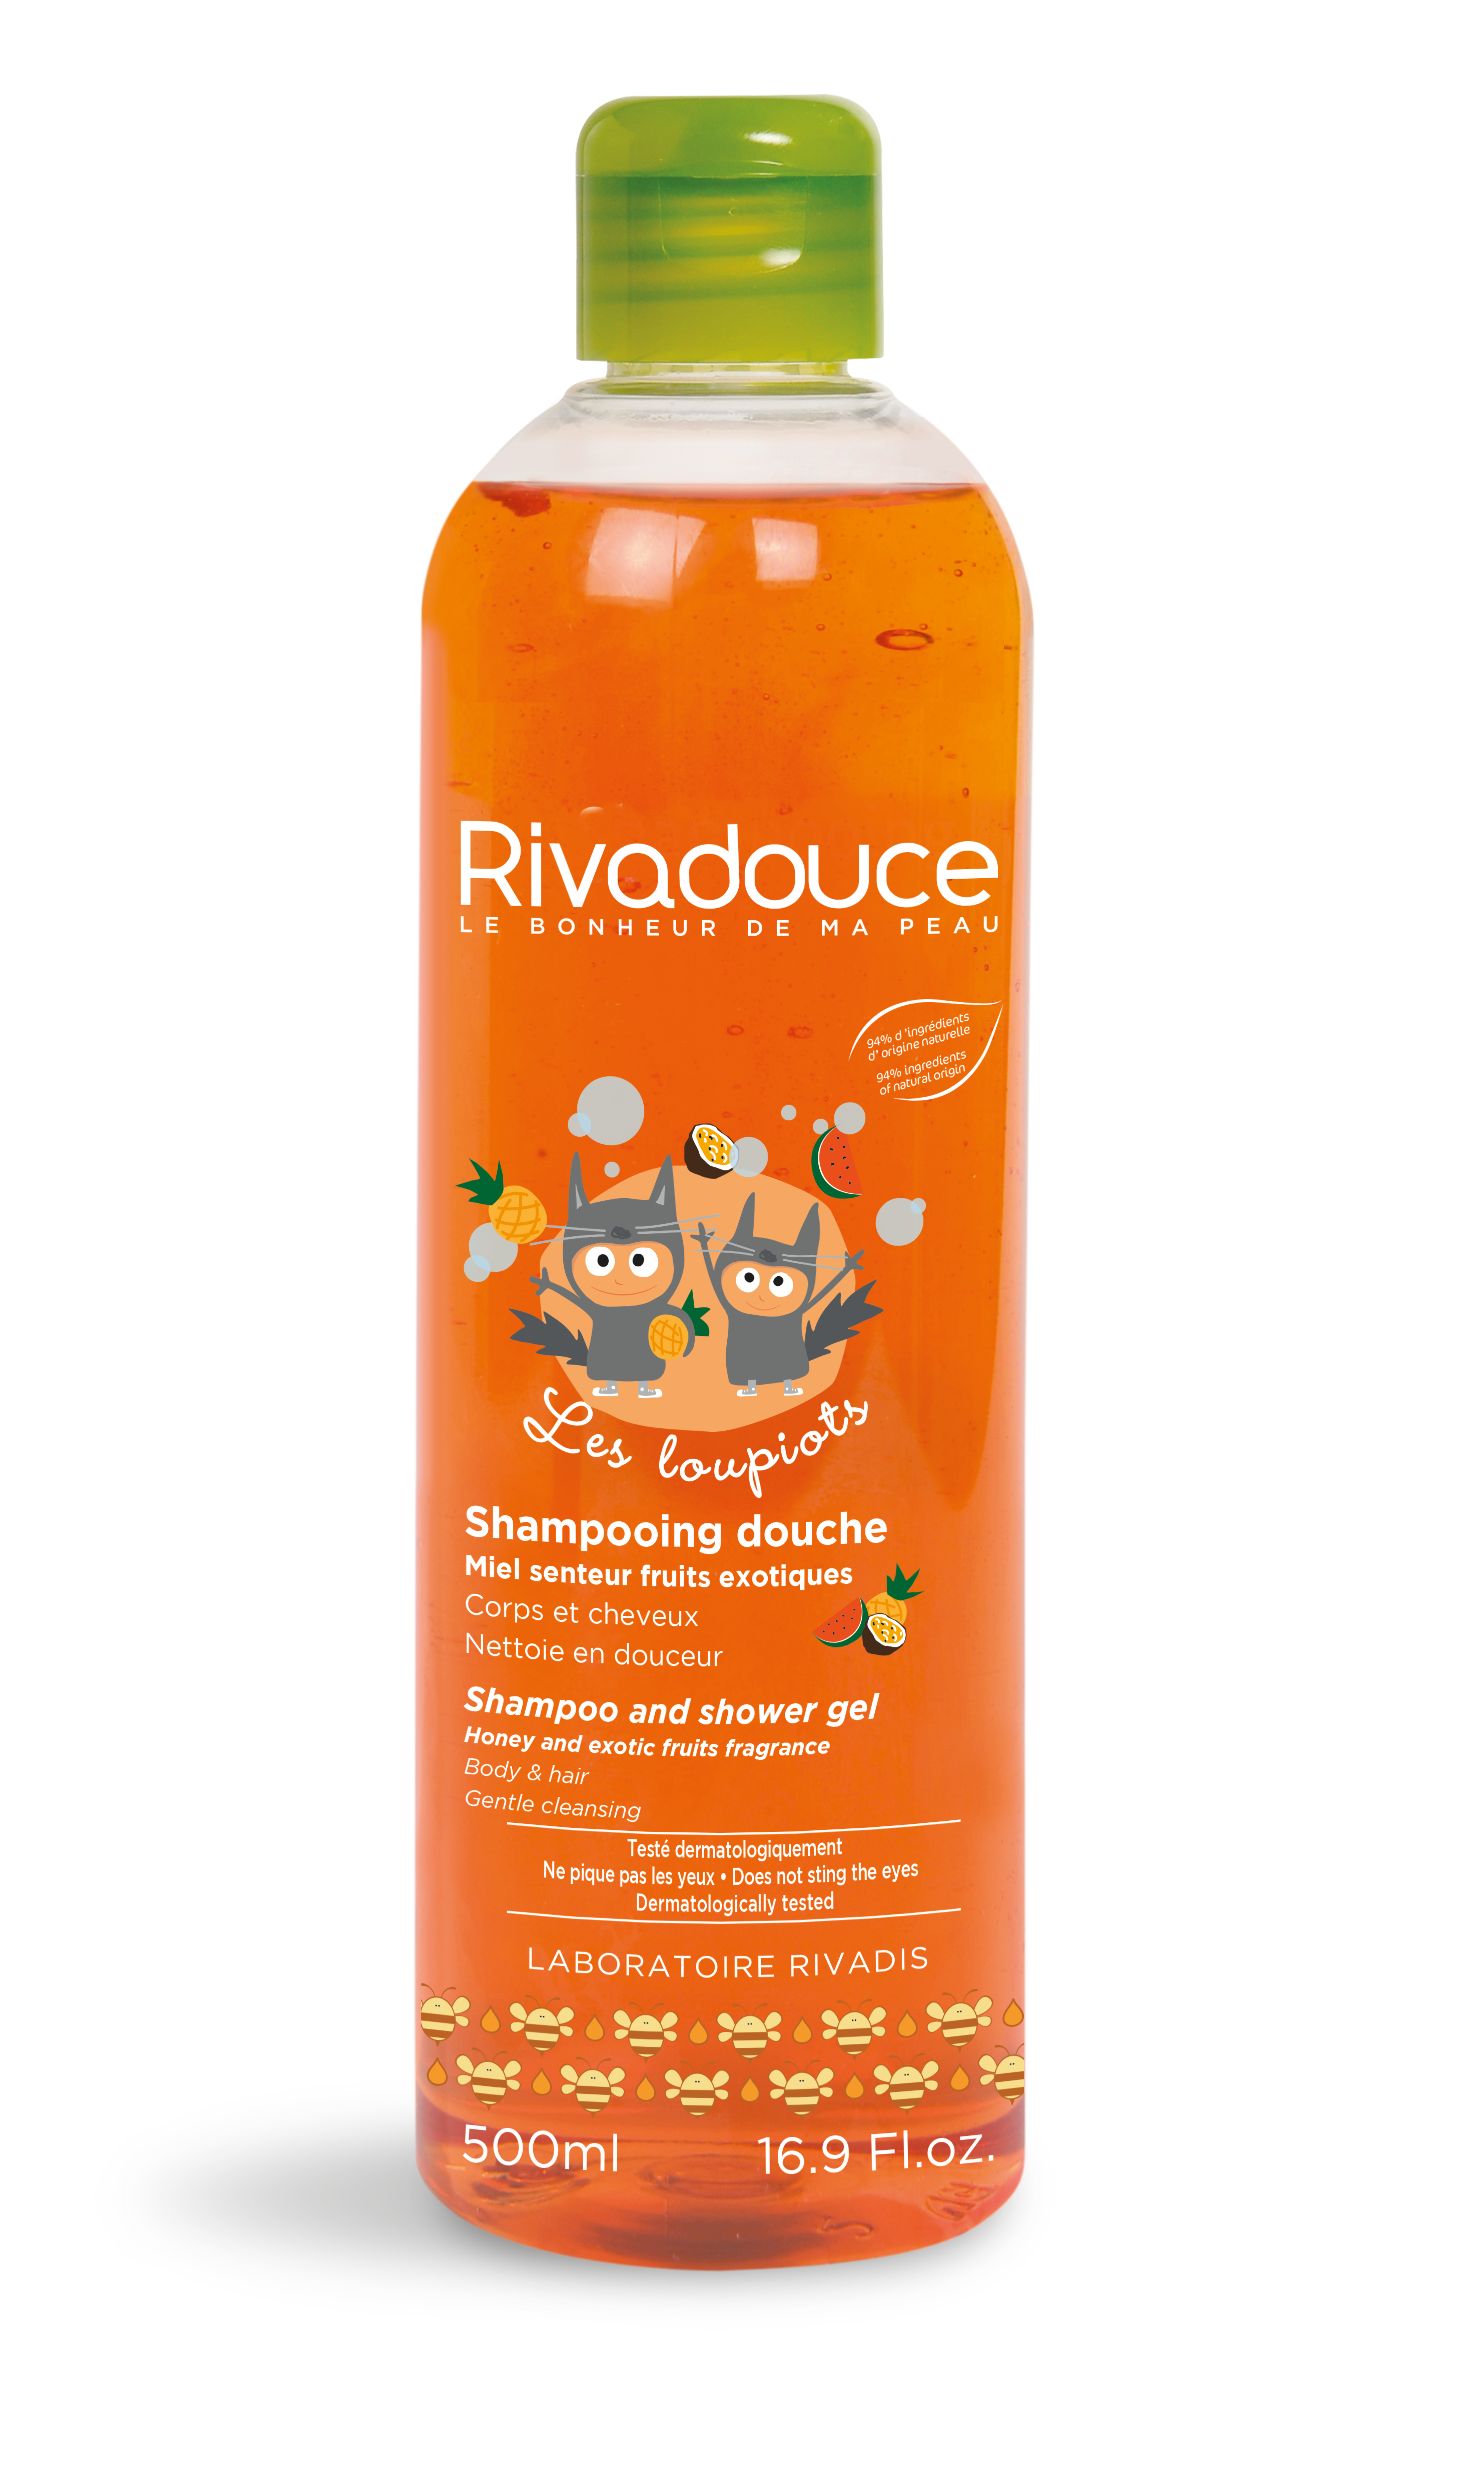 RIVADOUCE LOUPIOTS Shampooing Douche Miel et Fruits Exotiques (Honey and Exotic Fruits Shampoo and Body Wash) - 500ml